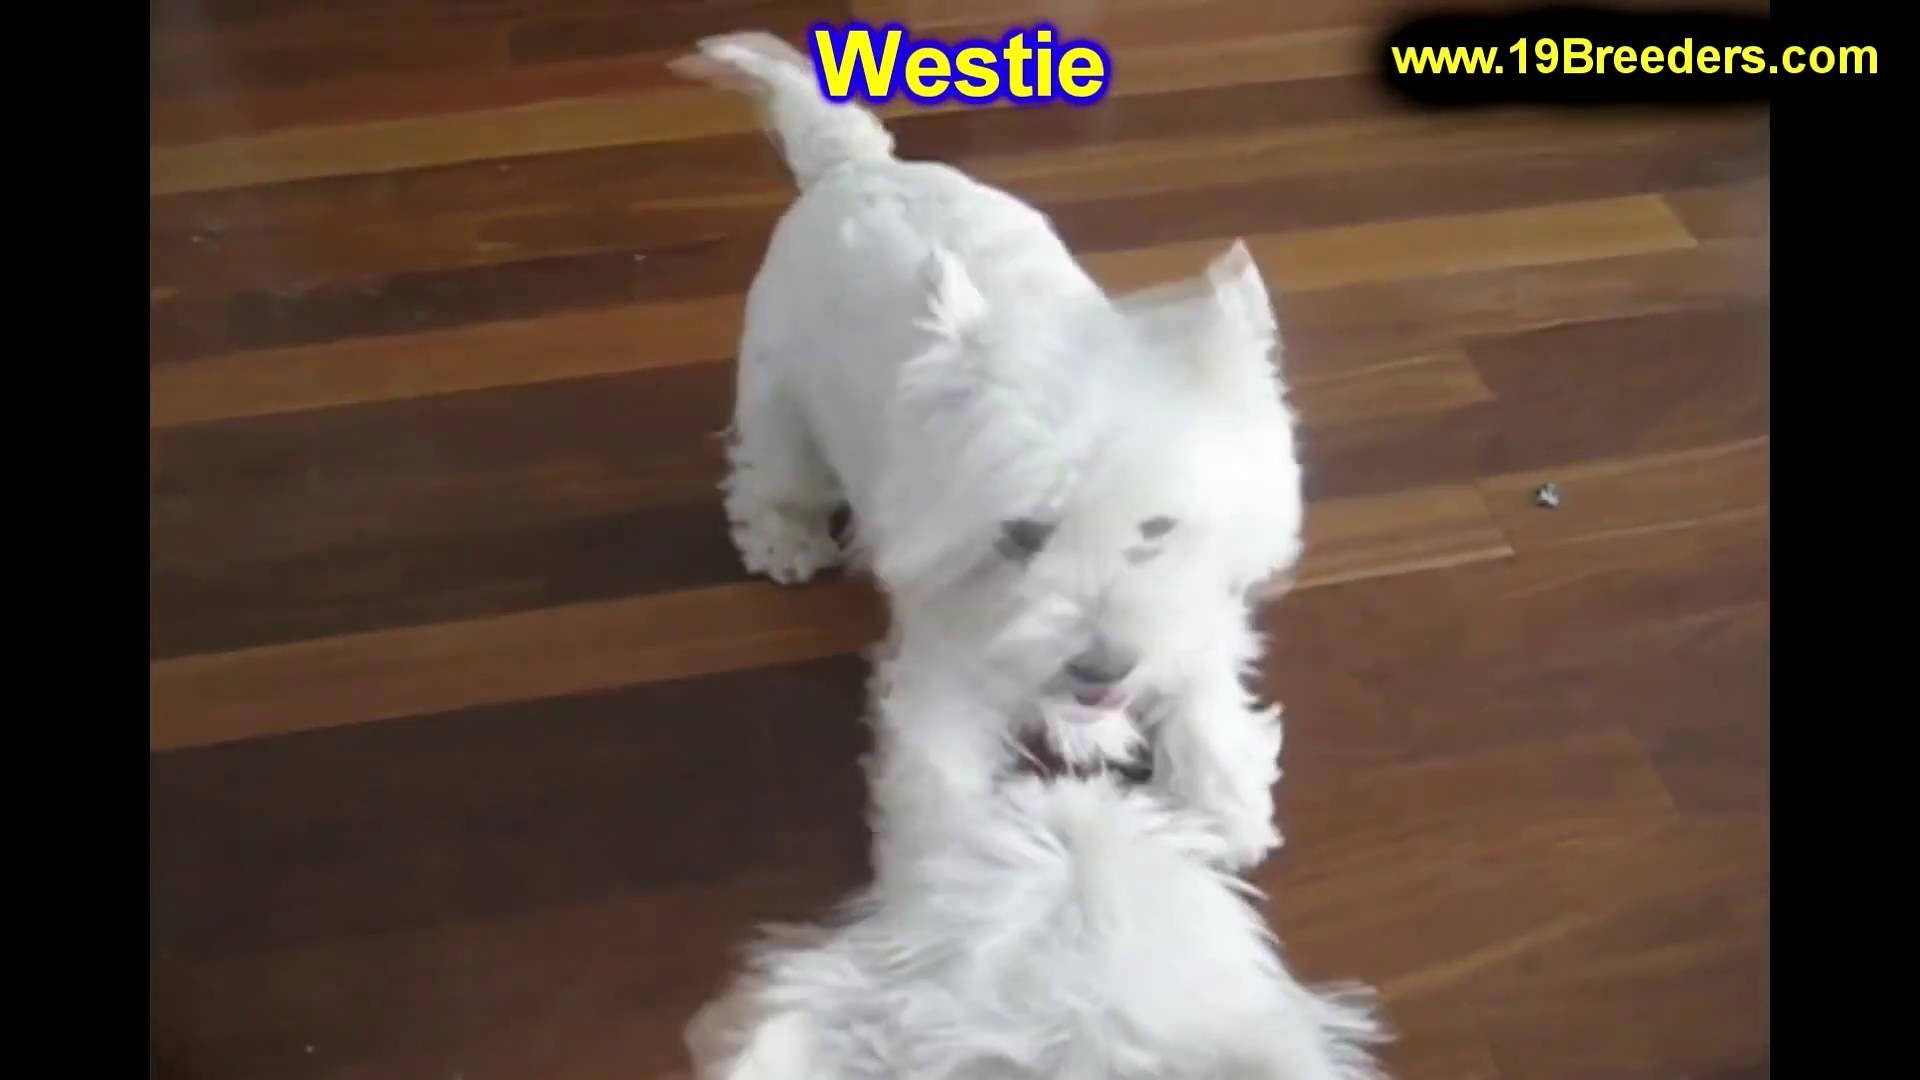 1920x1080 West Highland White Terrier, Westie, Puppies, Dogs, For Sale, In Miami,  Florida, FL, 19Breeders